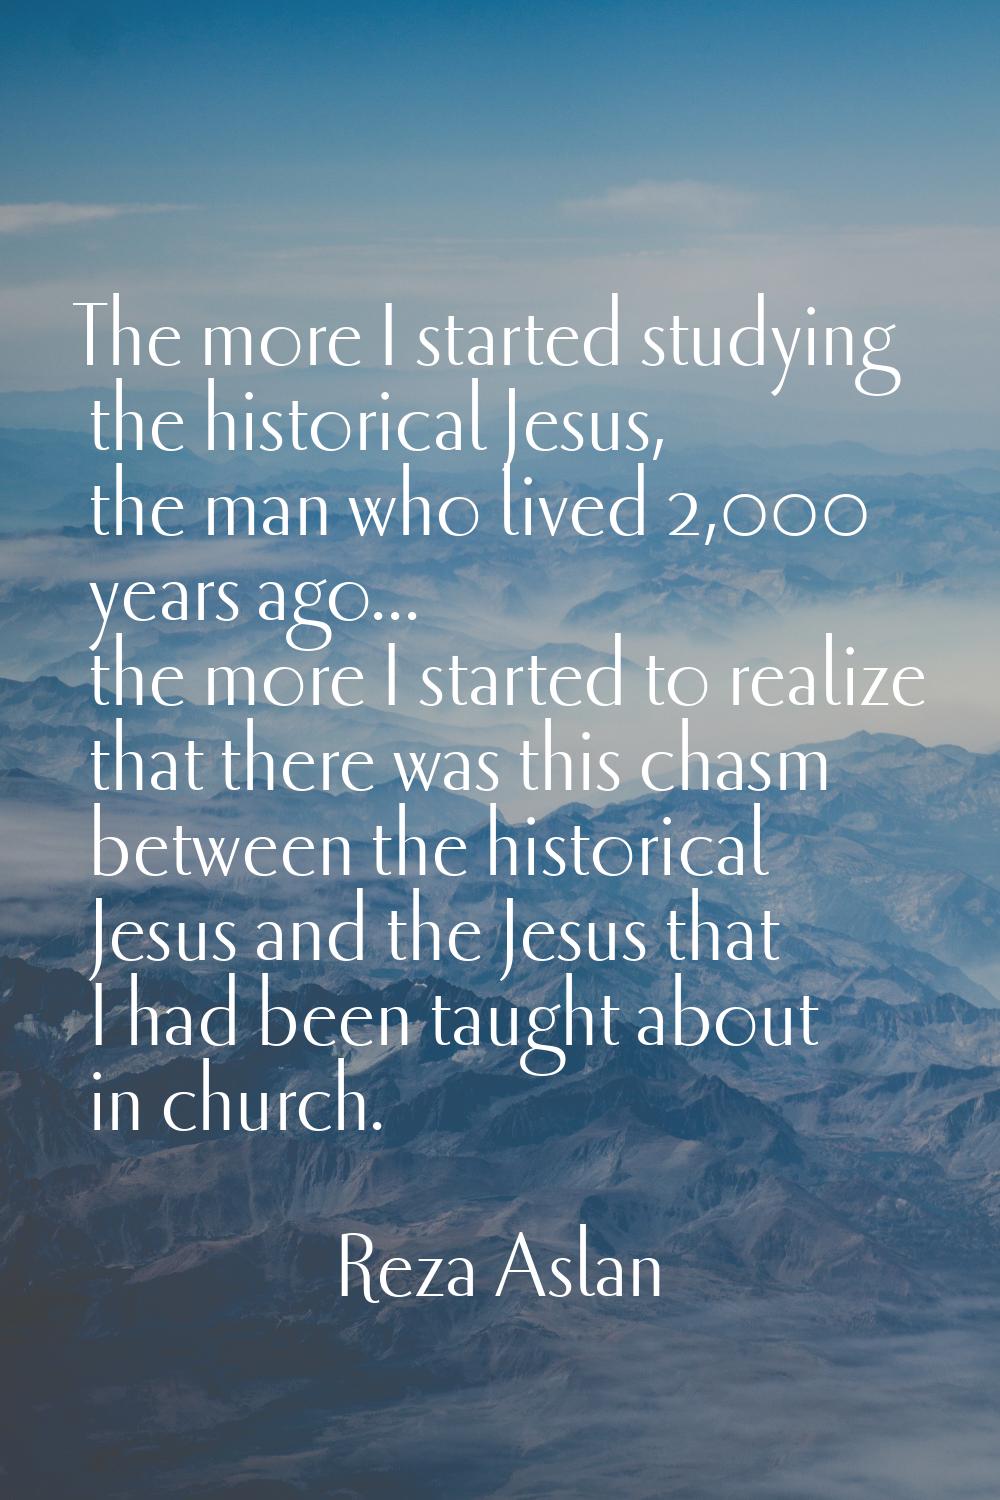 The more I started studying the historical Jesus, the man who lived 2,000 years ago... the more I s